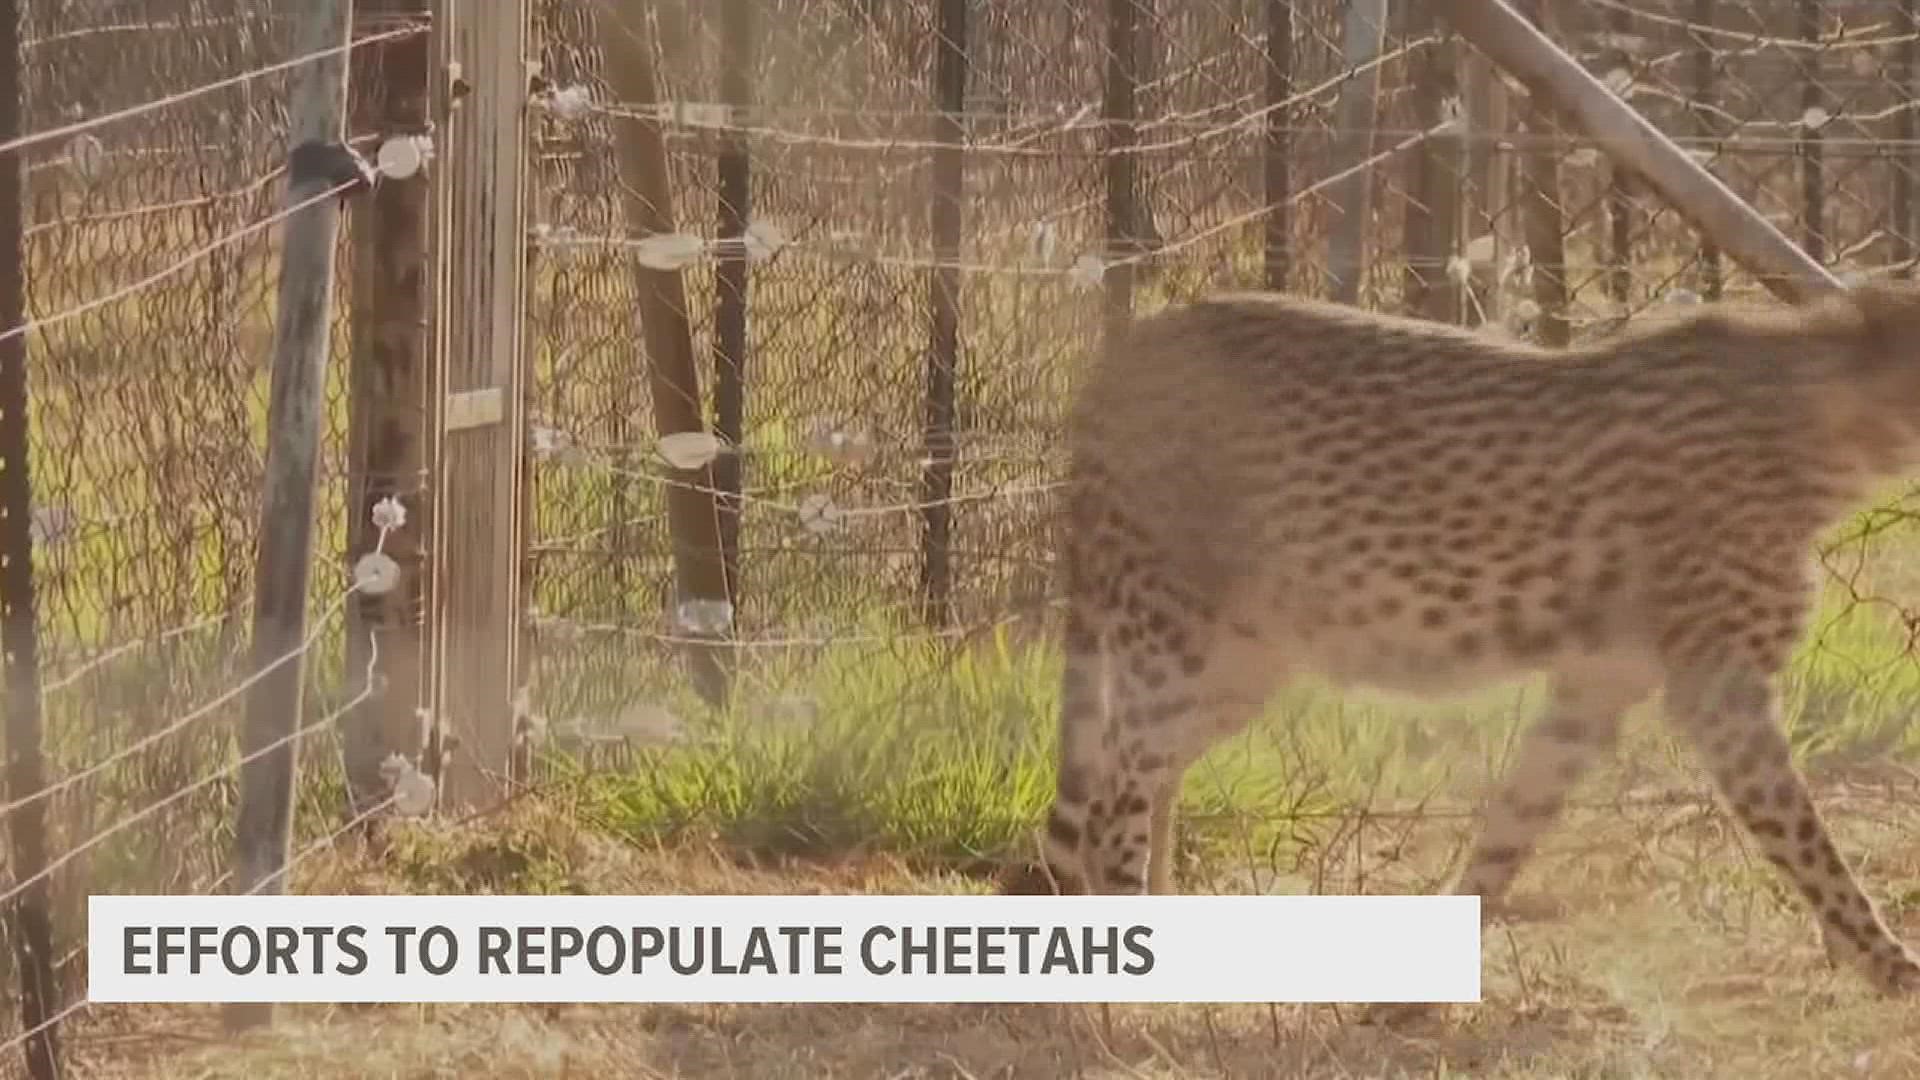 David says the only cheetahs he knows are the Cheetah Girls